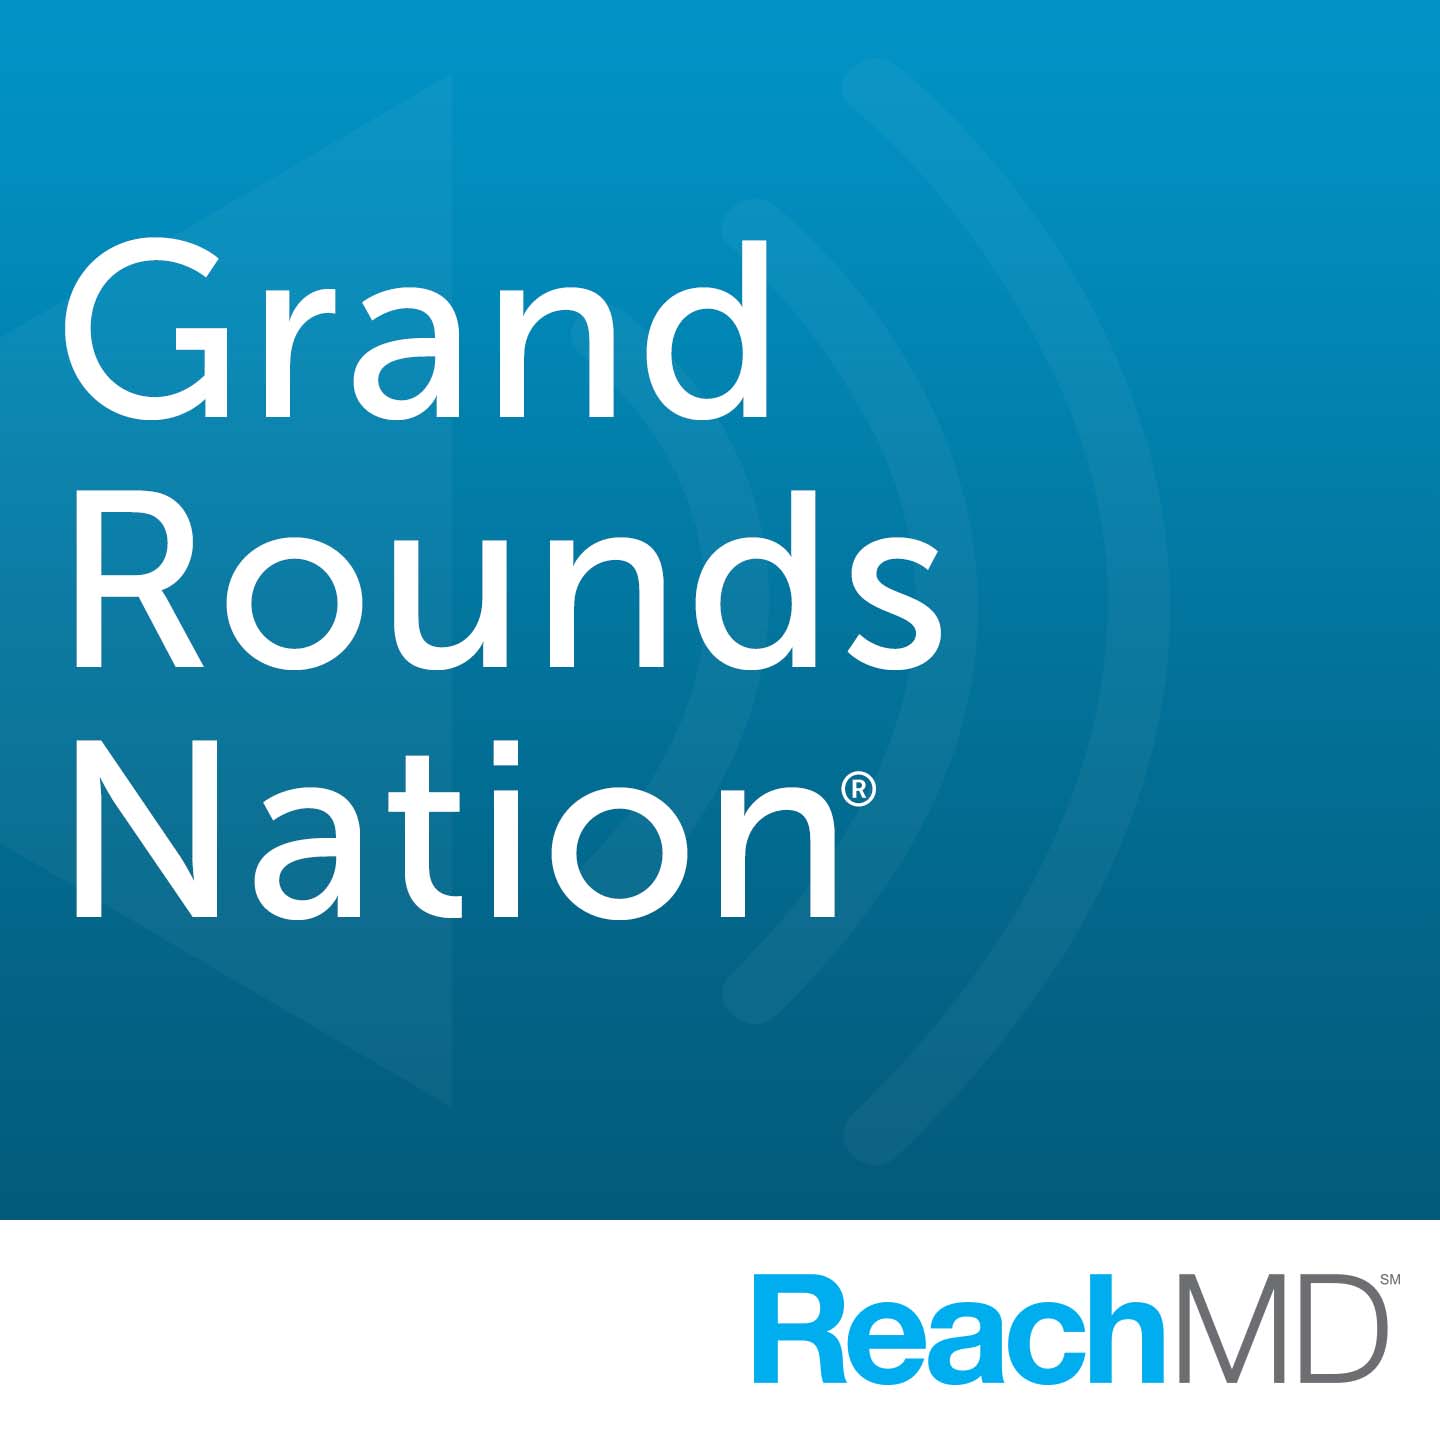 Grand Rounds Nation